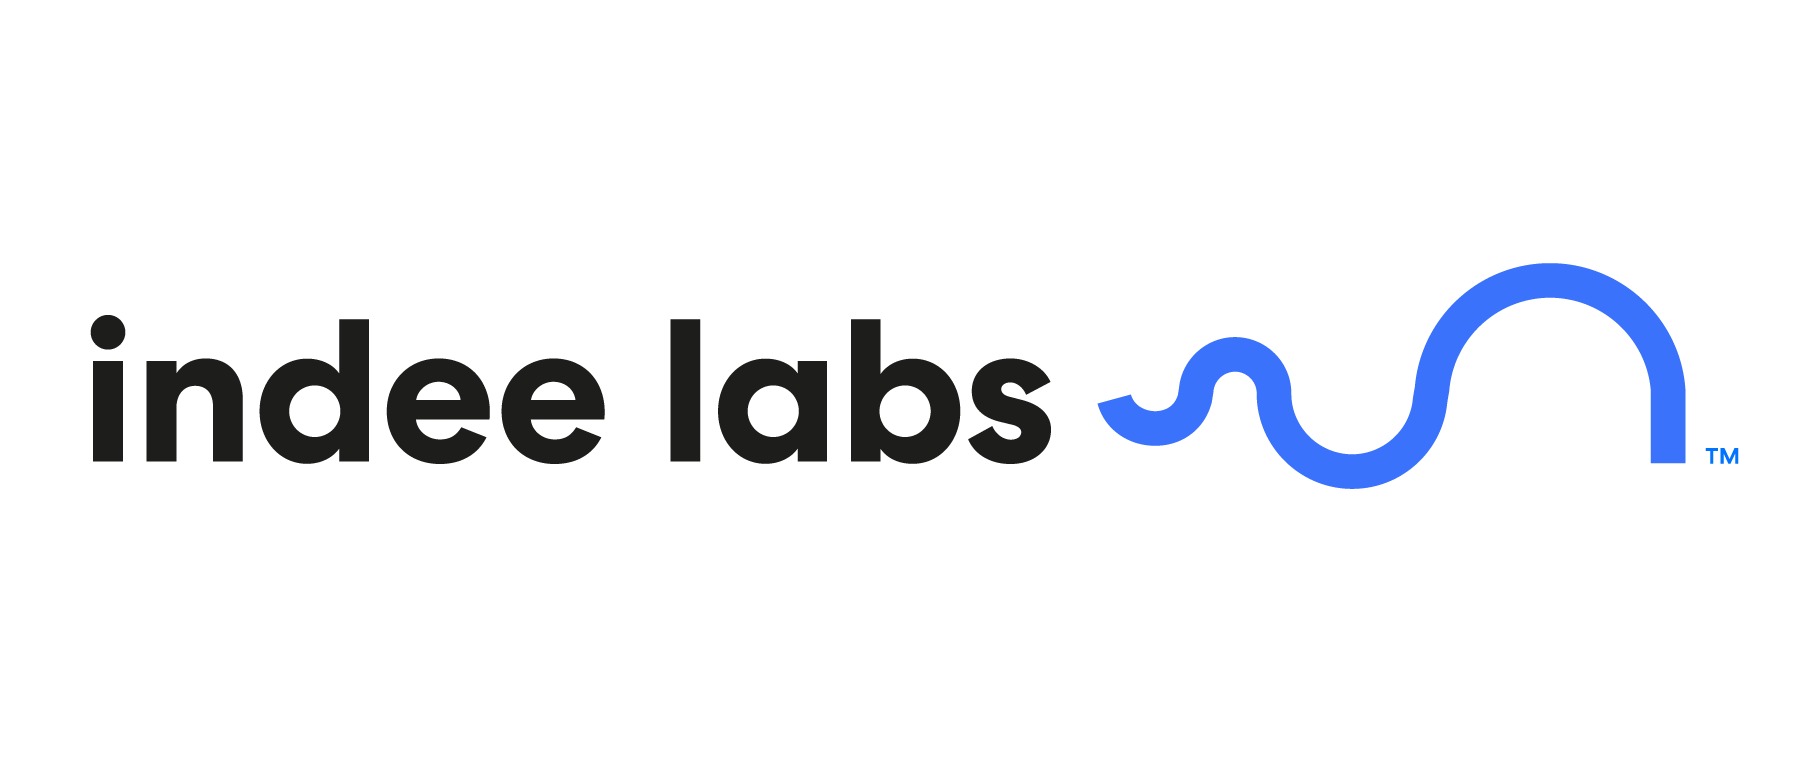 Indee Labs